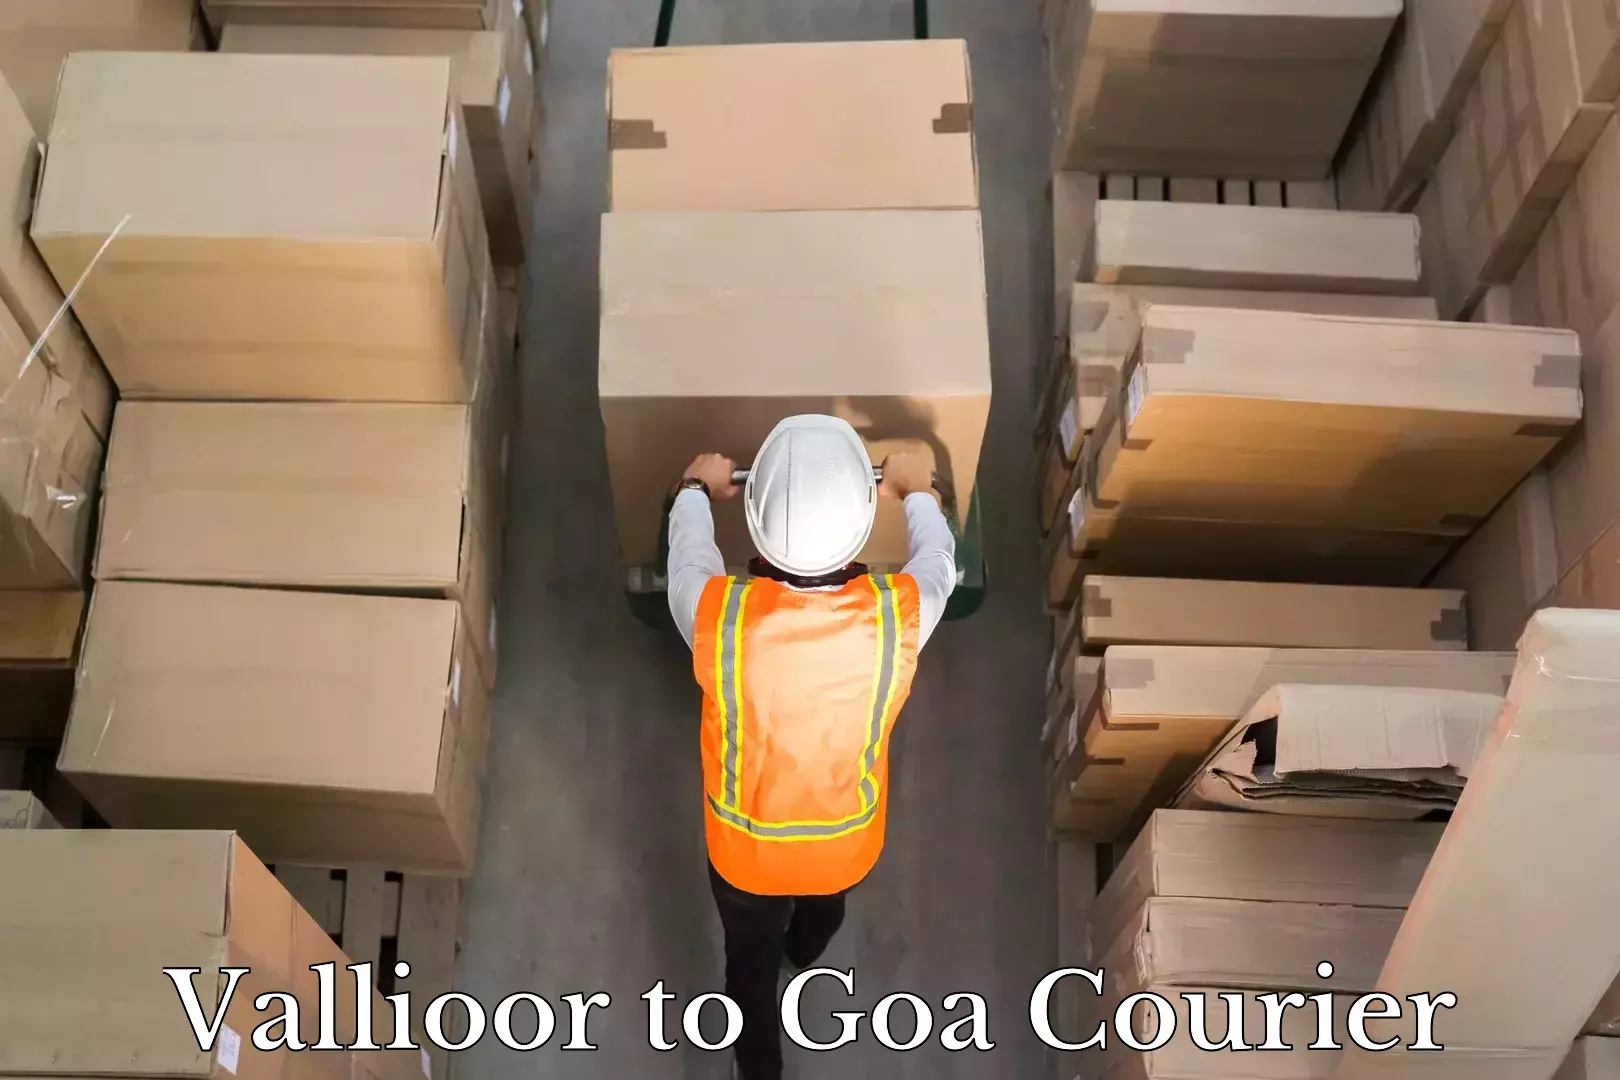 End-to-end delivery Vallioor to Goa